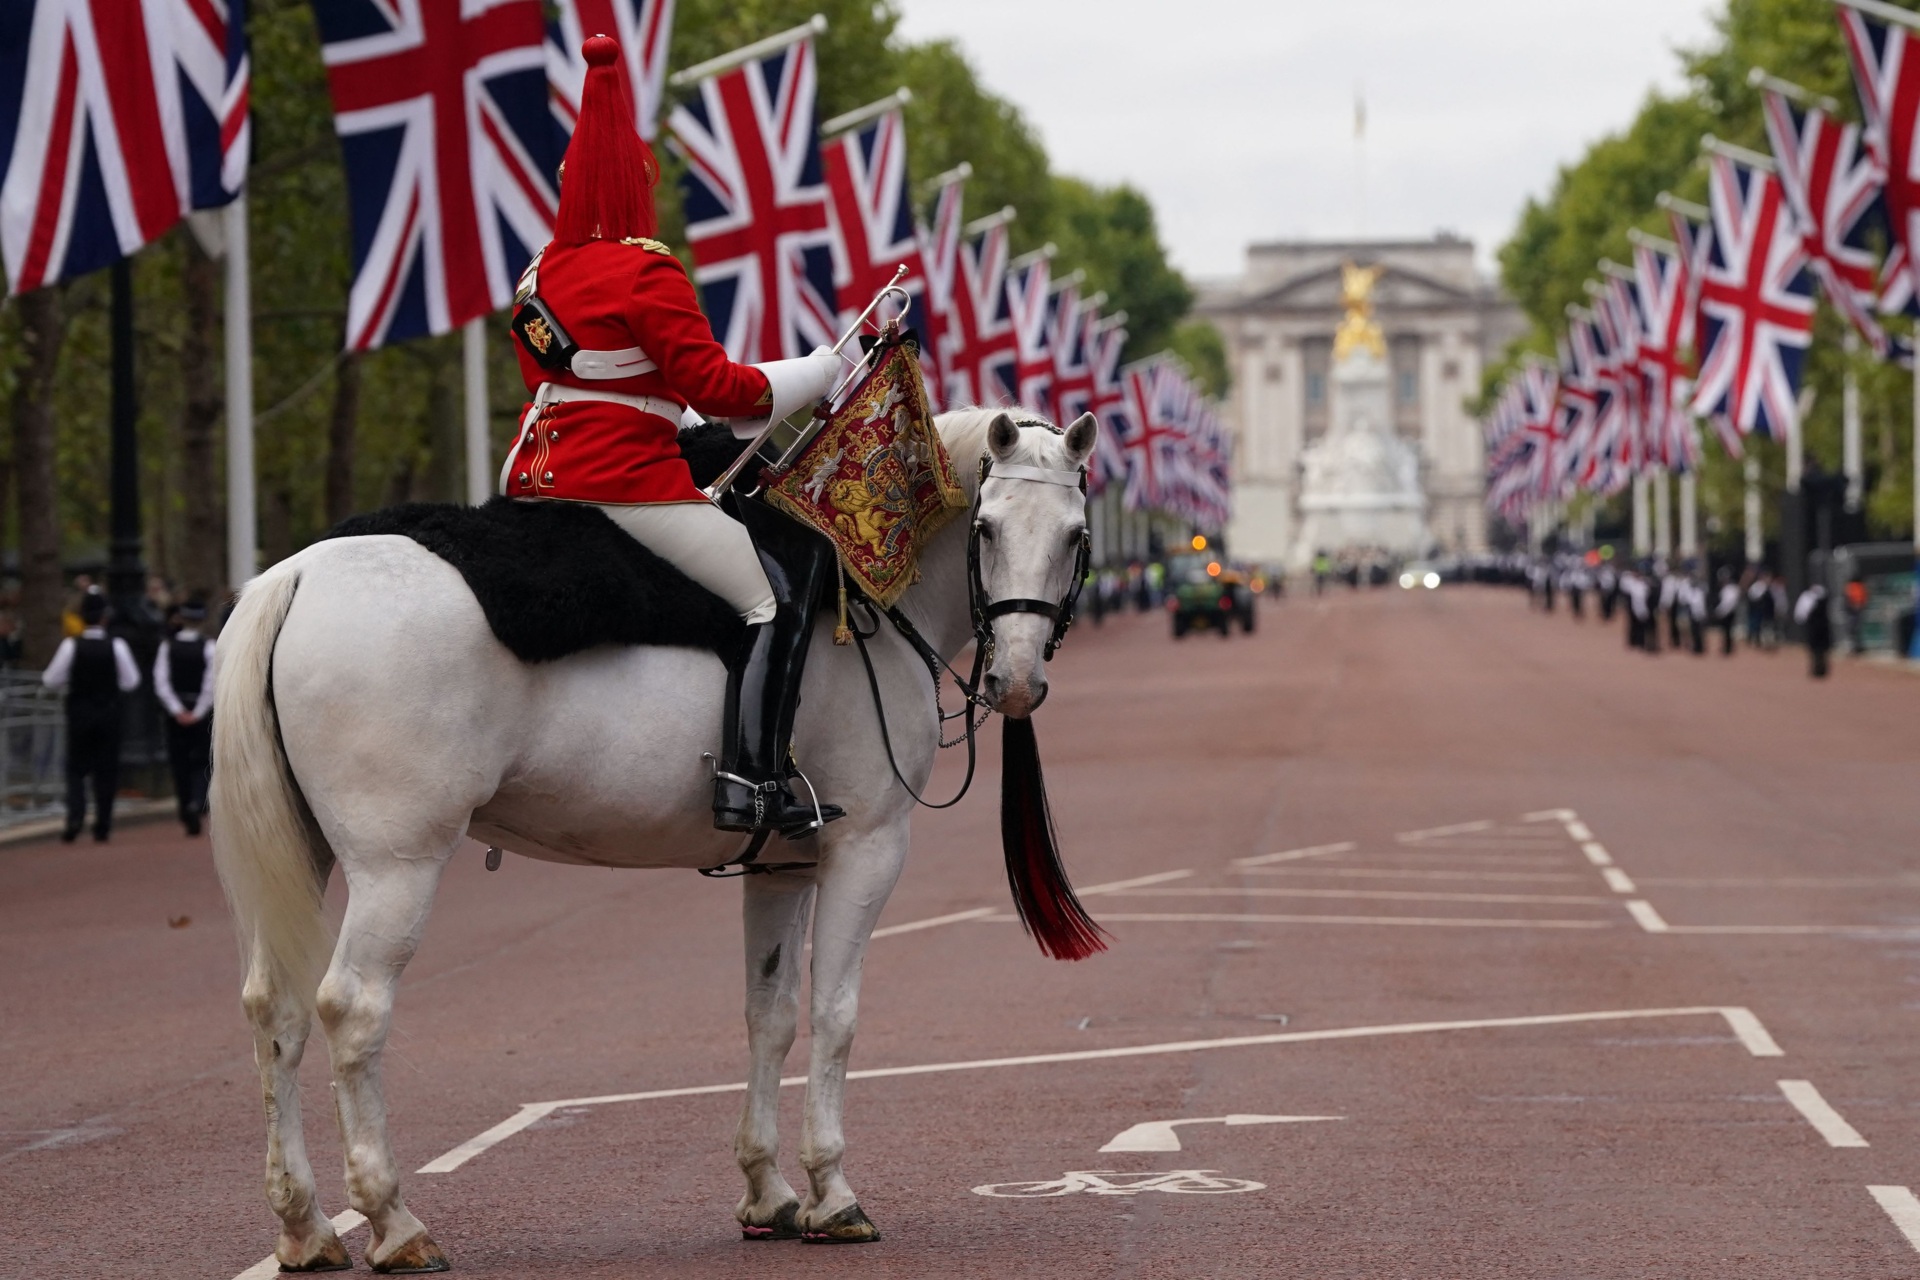 A military horse waits The Mall in central London on September 14, 2022, ahead of the ceremonial procession of the coffin of Queen Elizabeth II, from Buckingham Palace to Westminster Hall. - As preparations build for next week's state funeral, the royal family on Wednesday will walk behind the queen's coffin in a procession through central London, after which thousands of members of the public are expected to come to pay their final respects at her lying in state. (Photo by Victoria Jones / POOL / AFP) (Photo by VICTORIA JONES/POOL/AFP via Getty Images)